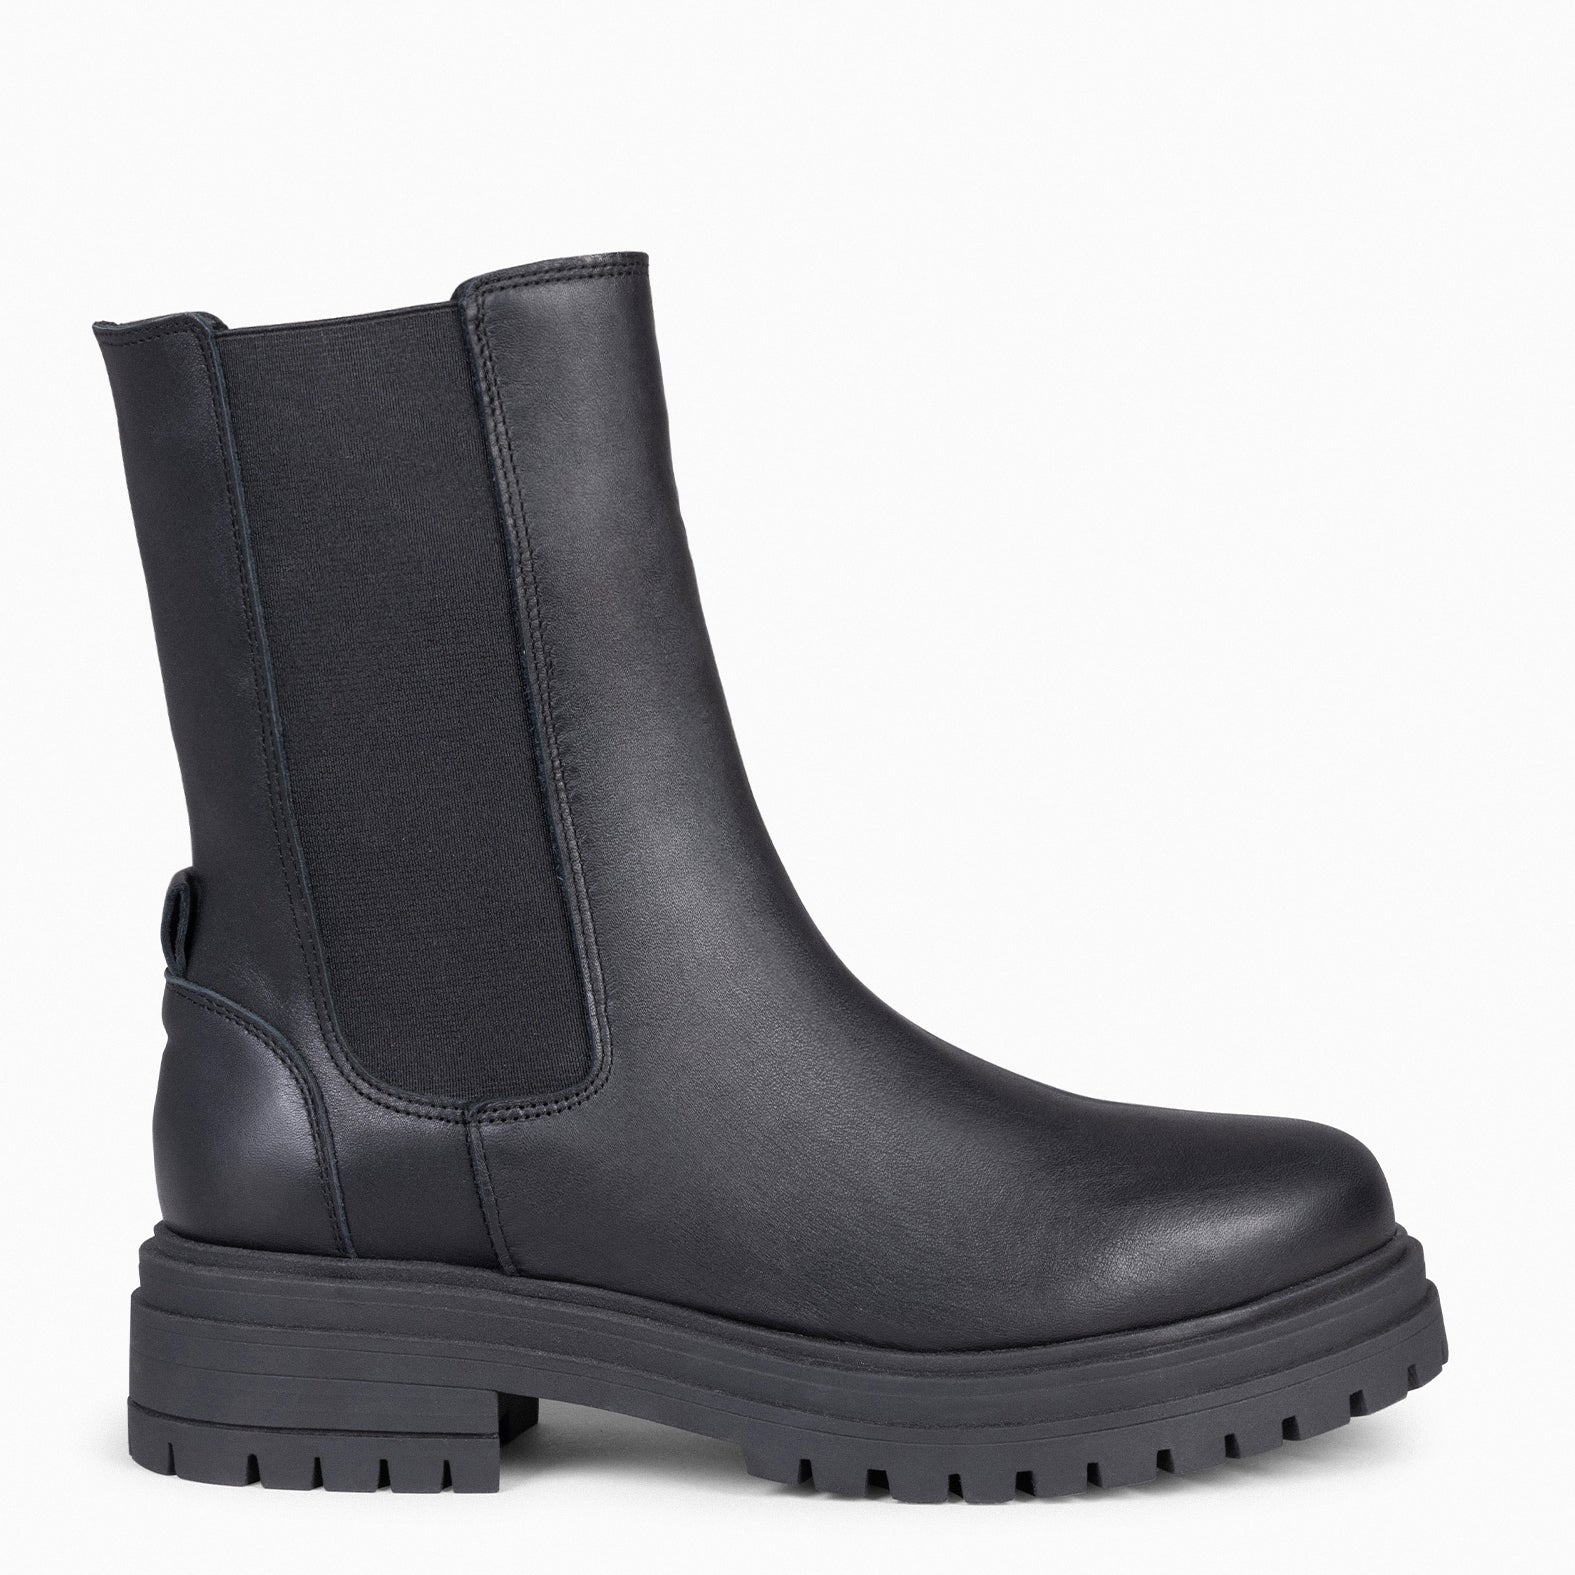 STANFORD – BLACK Chelsea Boots with Track Platform